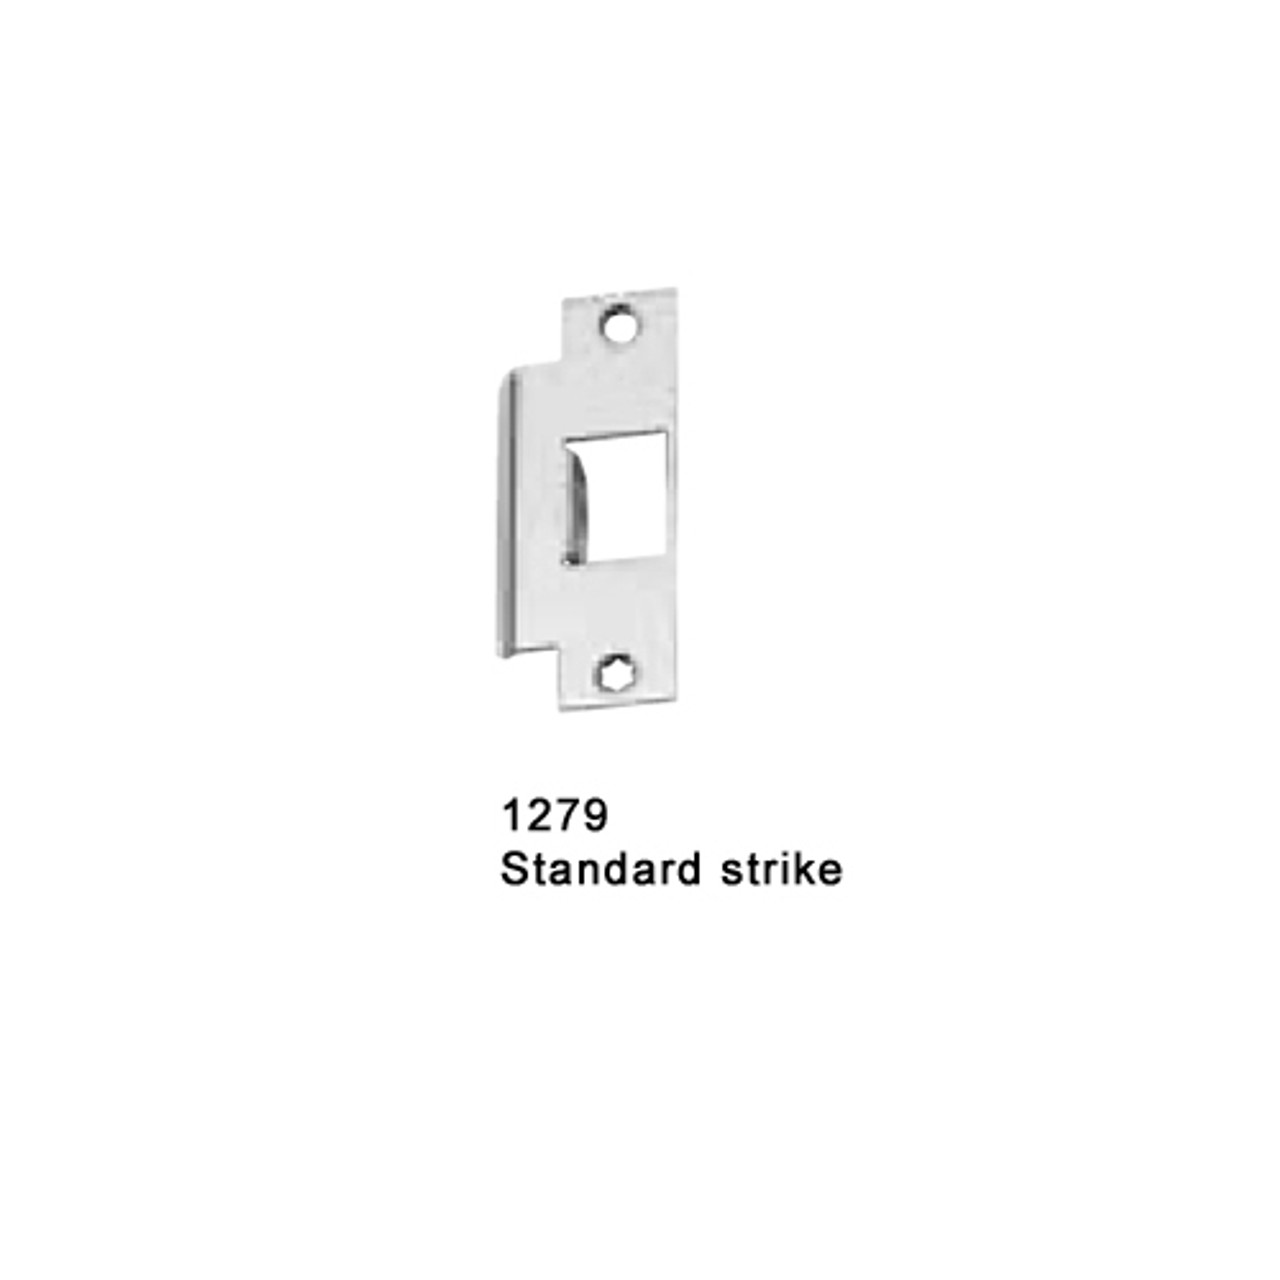 F-25-M-EO-US28-3-RHR Falcon 25 Series Fire Rated Exit Only Mortise Lock Devices in Anodized Aluminum